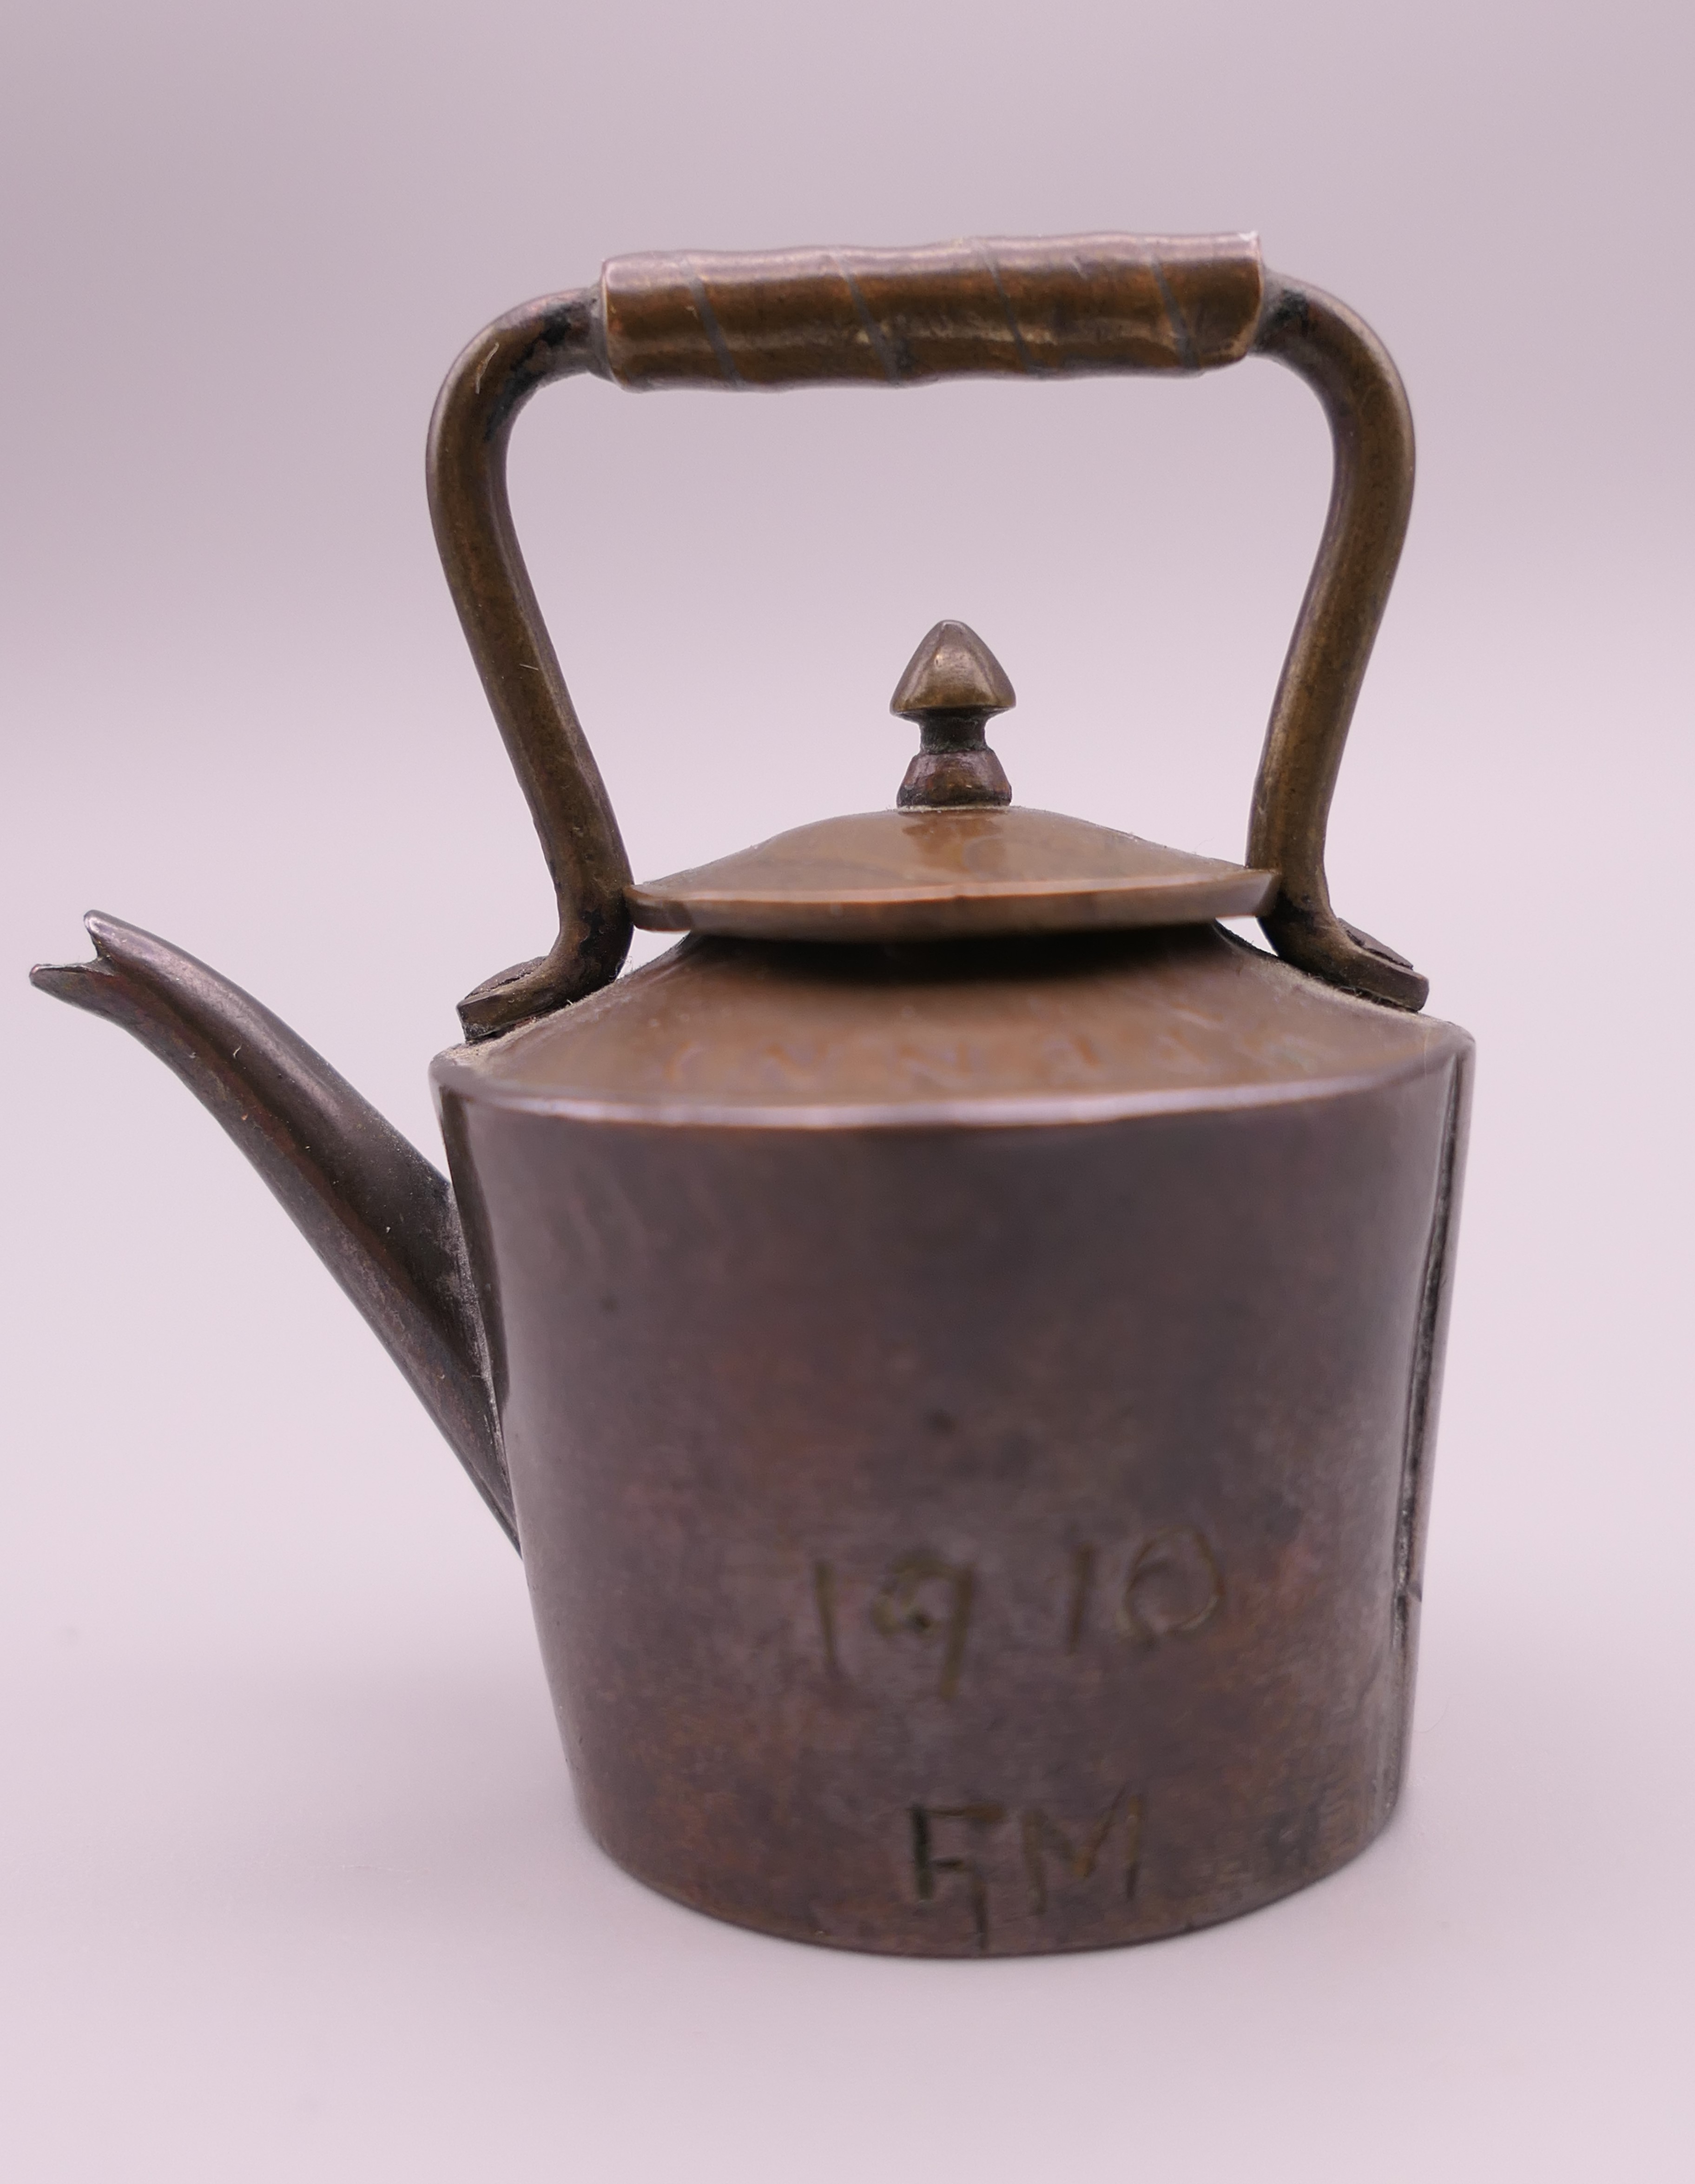 A doll's house copper kettle, made from old copper coins. 5 cm high. - Image 2 of 4